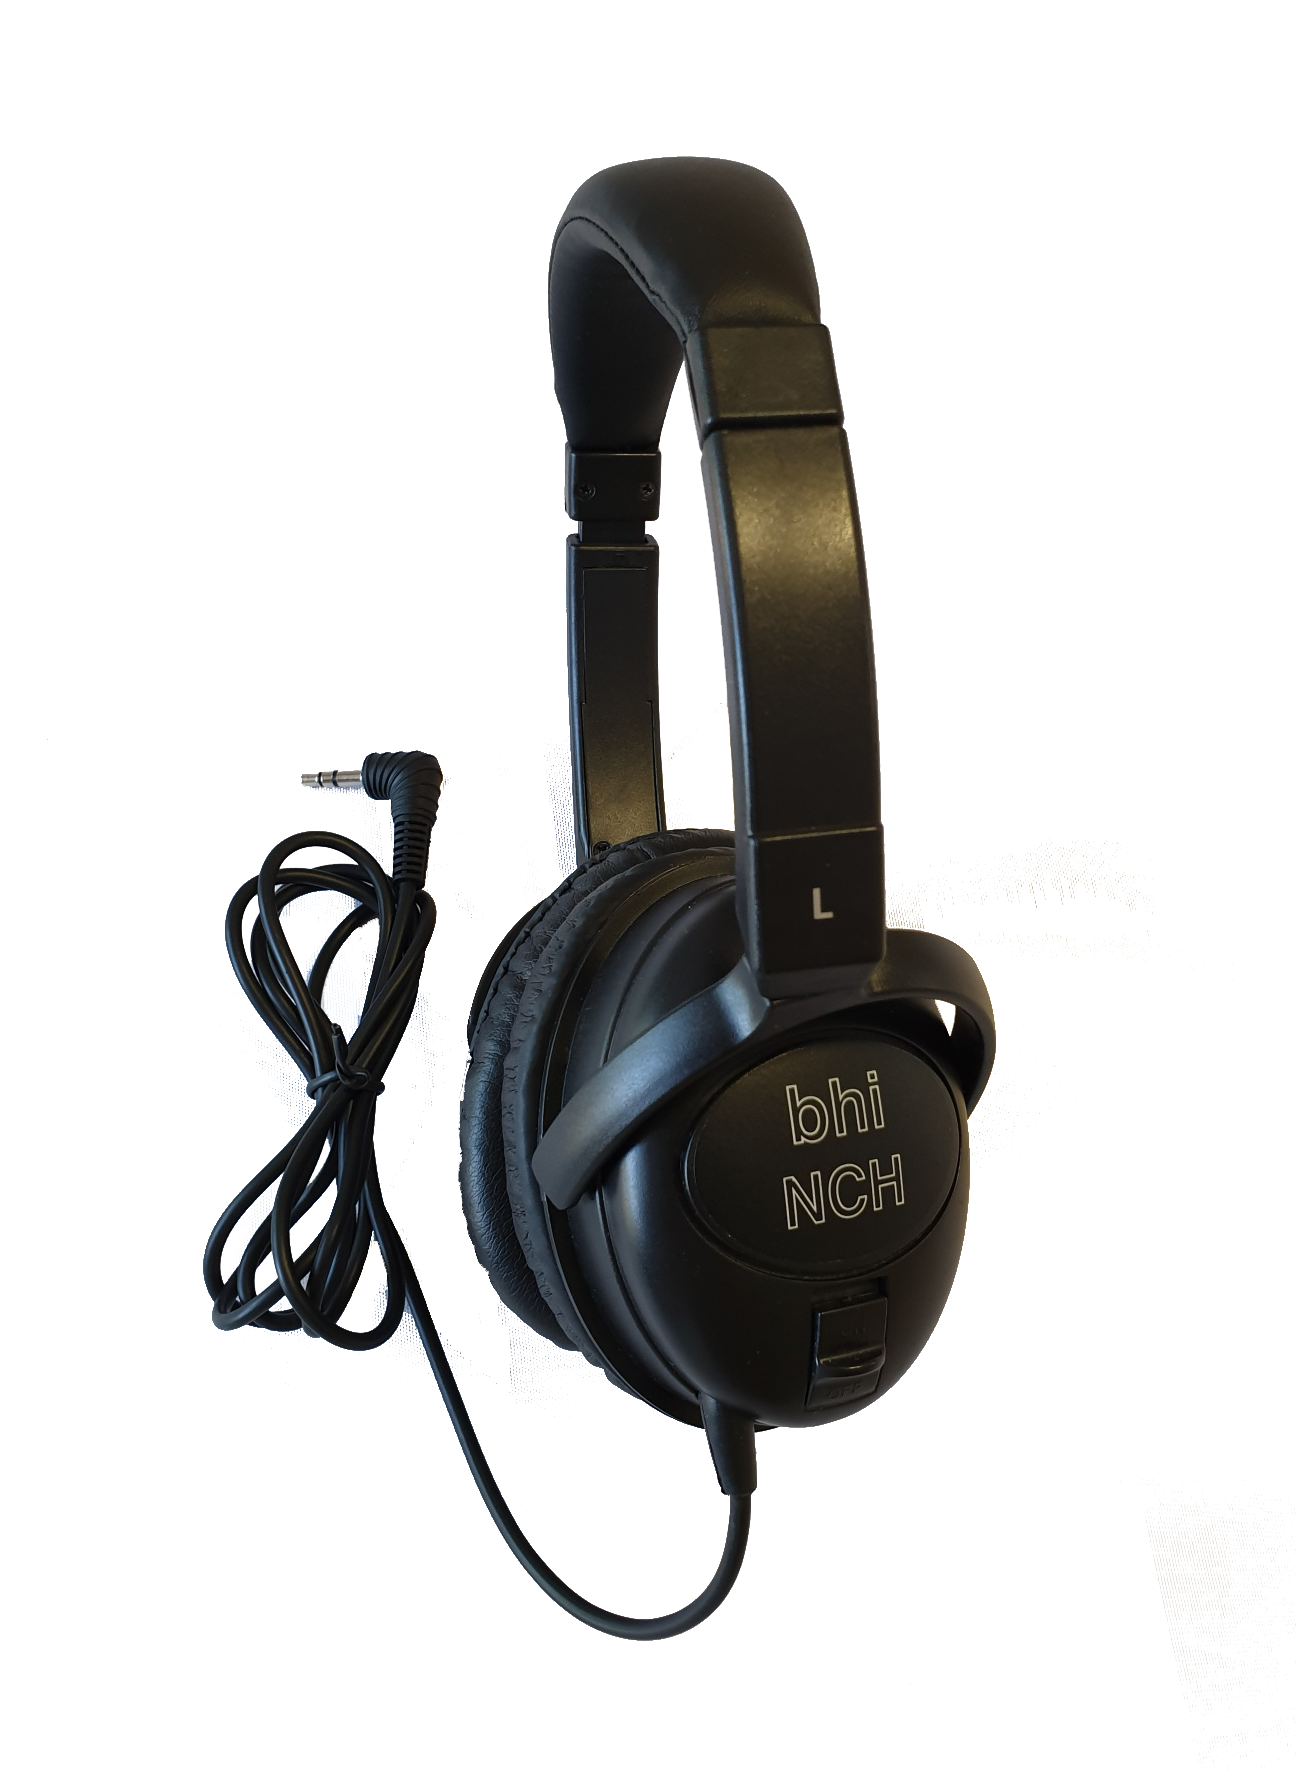 Nch noise cancelling headphones